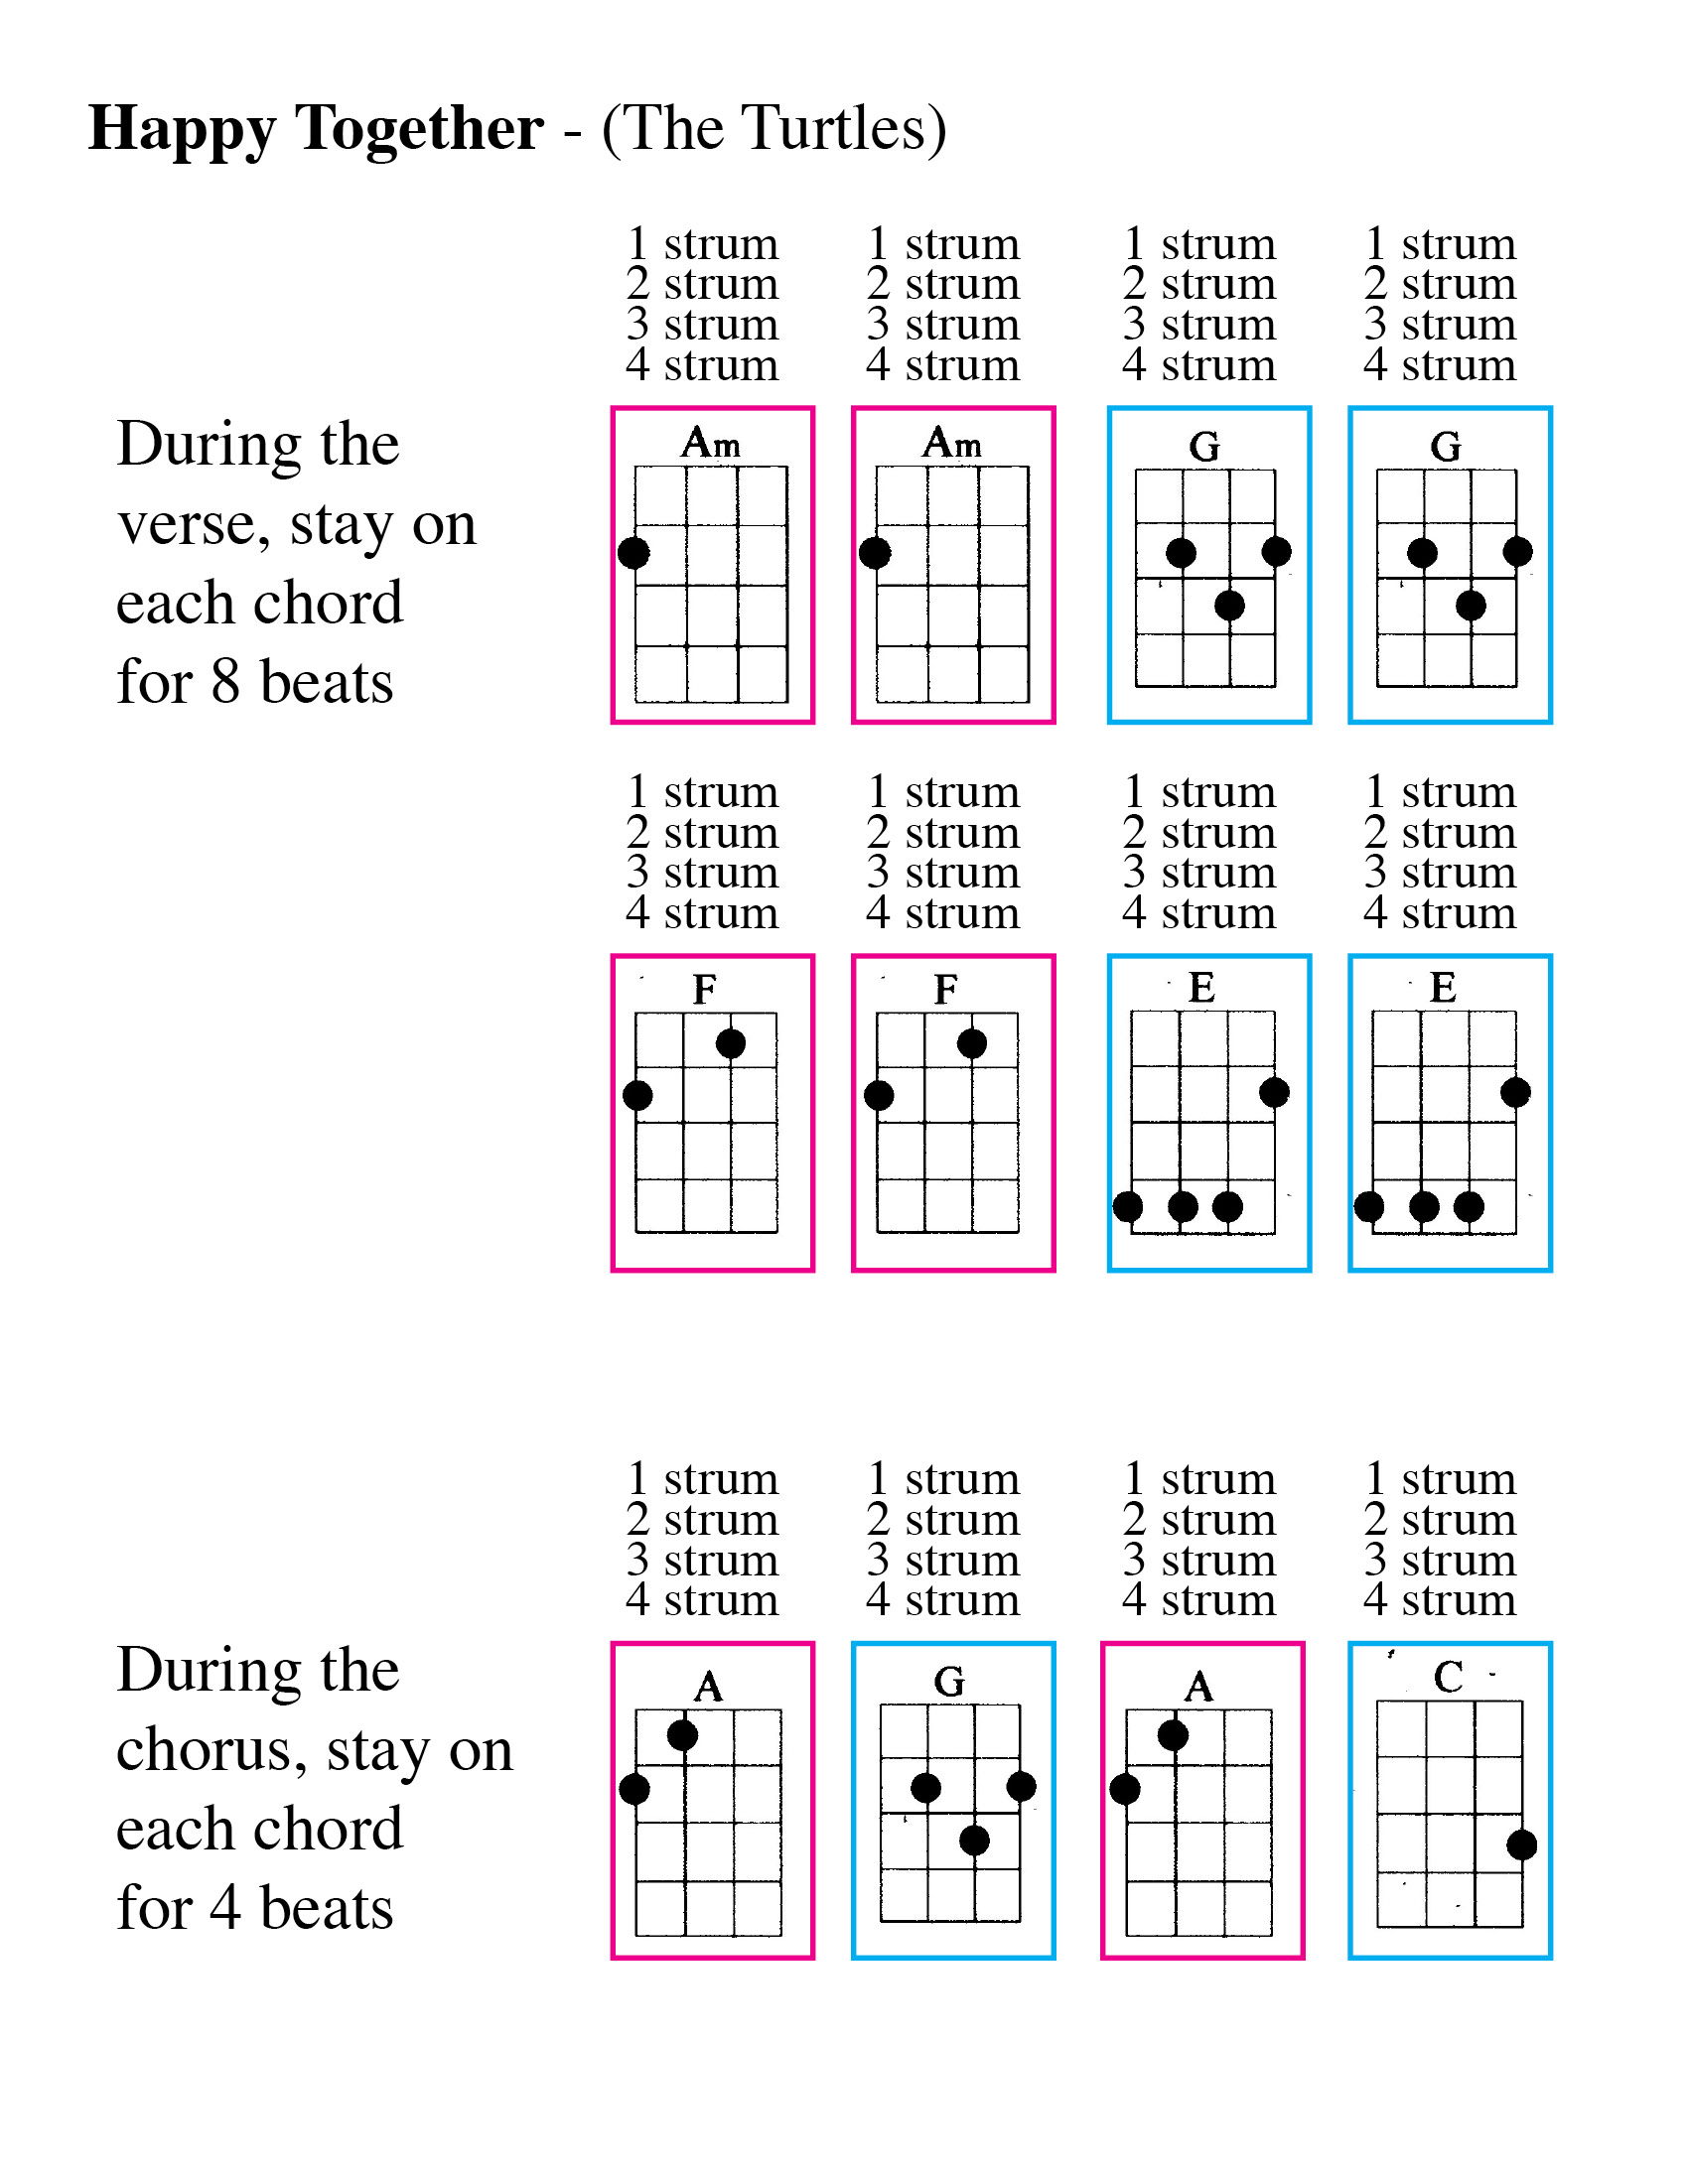 Happy together chords